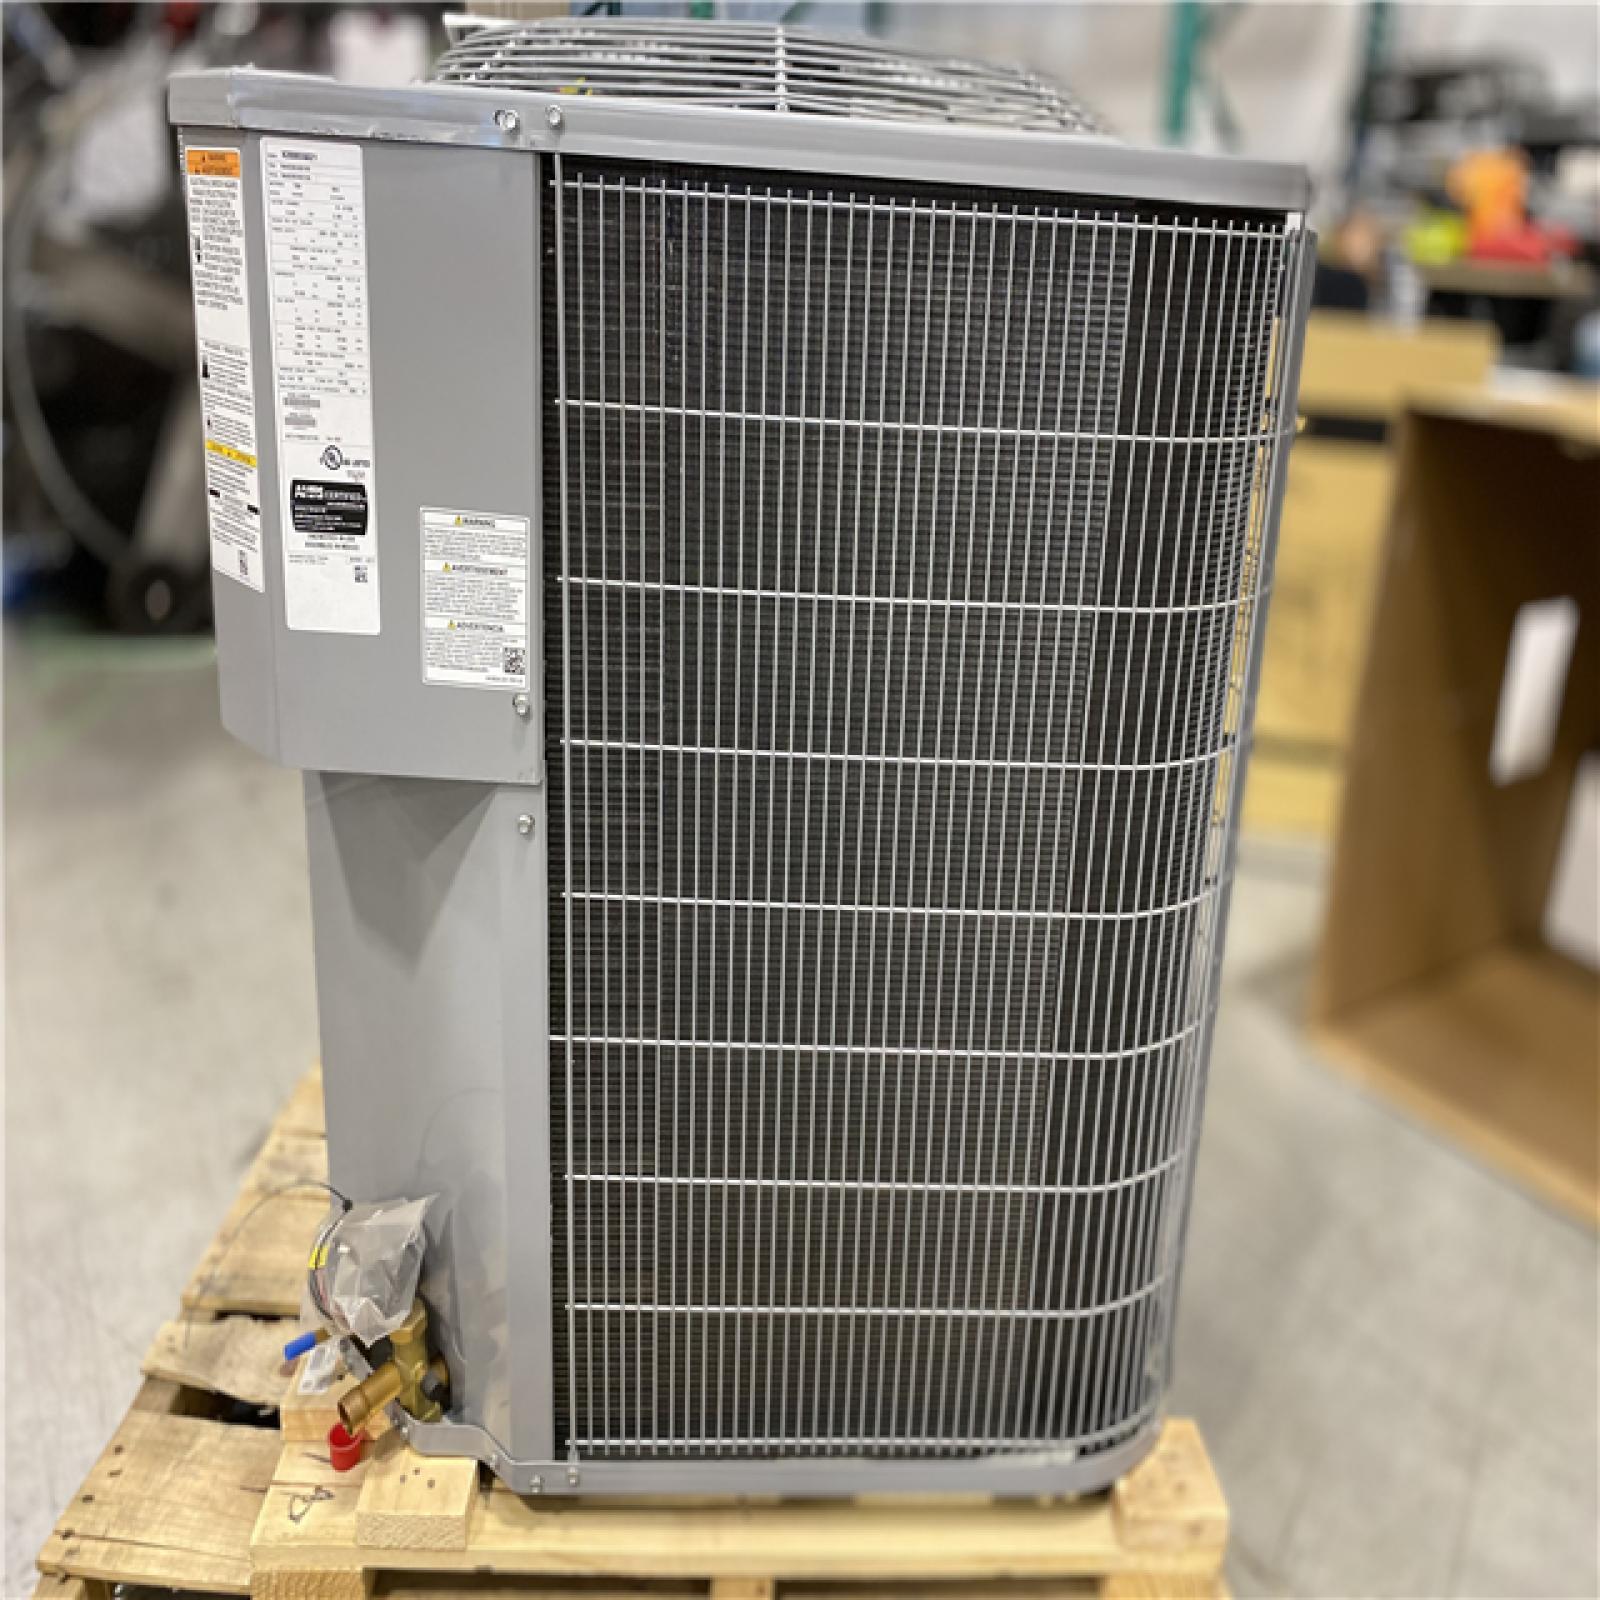 DALLAS LOCATION -Smartcomfort By Carrier 3 Ton 14 Seer Condensing Unit